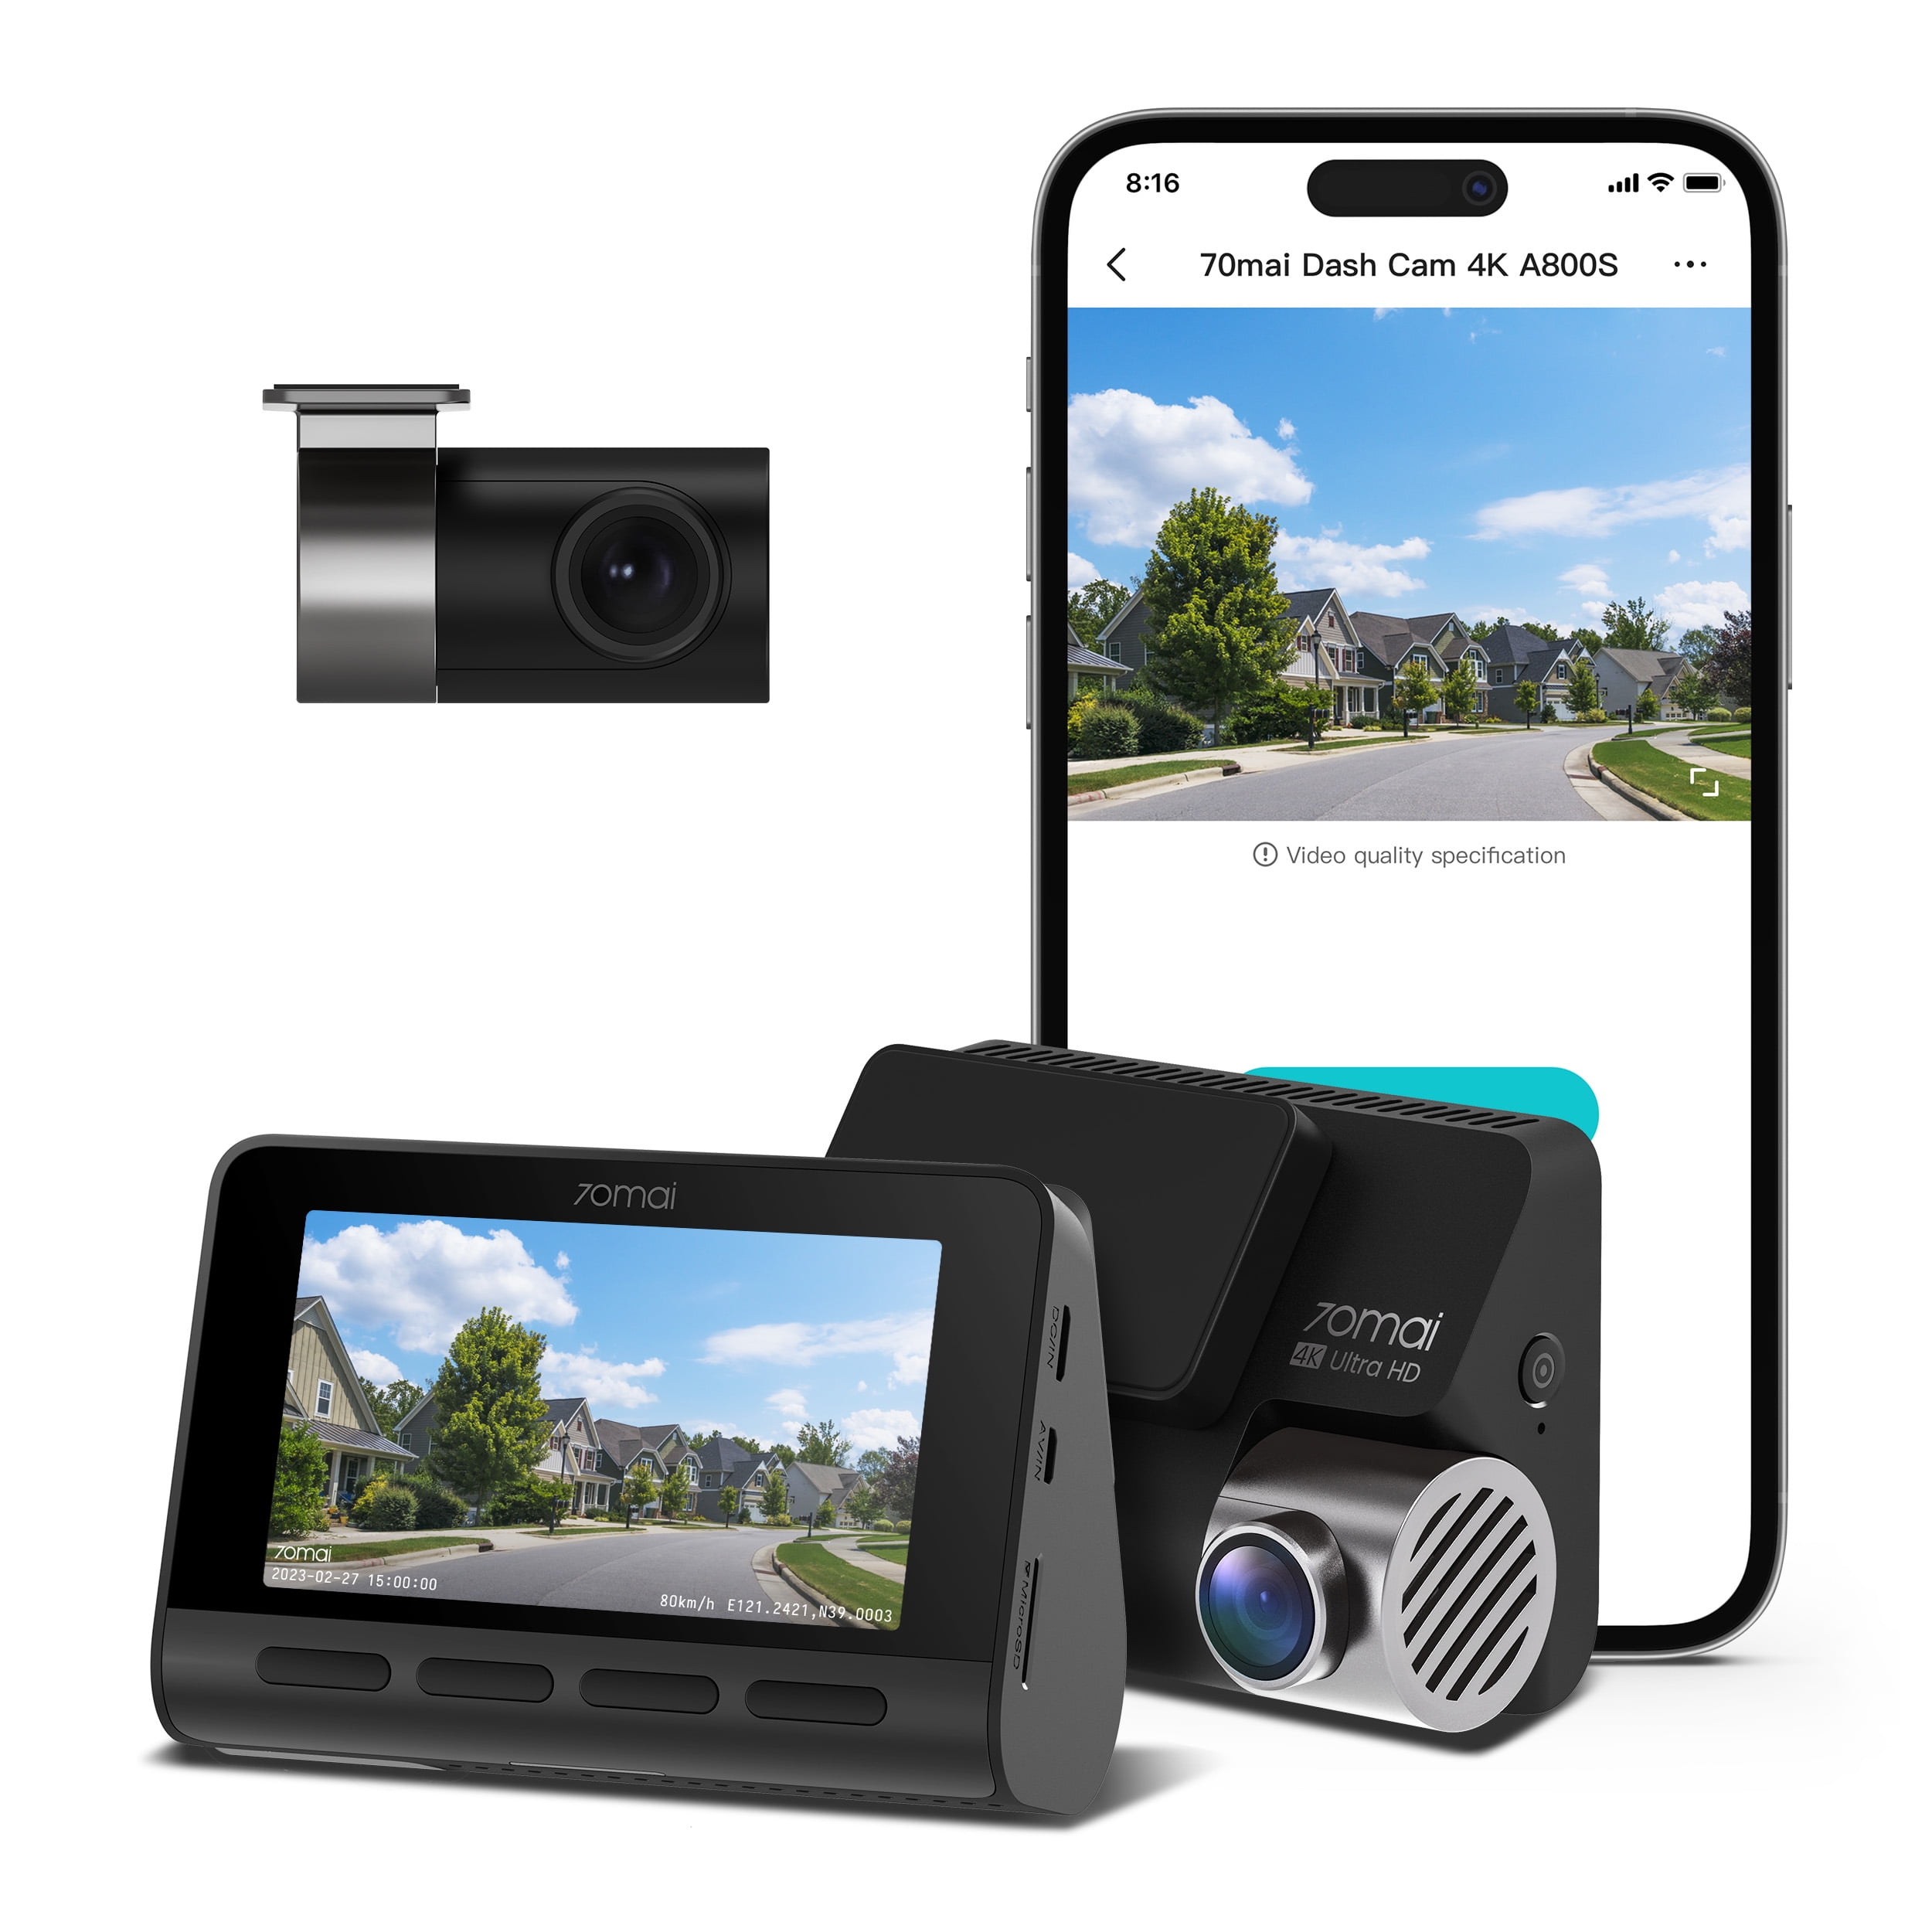 majs Ryd op Regnjakke 70mai True 4K Dash Cam A800S with Sony IMX415, Built in GPS, Super Night  Vision, 3'' IPS LCD, Parking Mode, ADAS, Loop Recording, iOS/Android App  Control, Front and Rear - Walmart.com